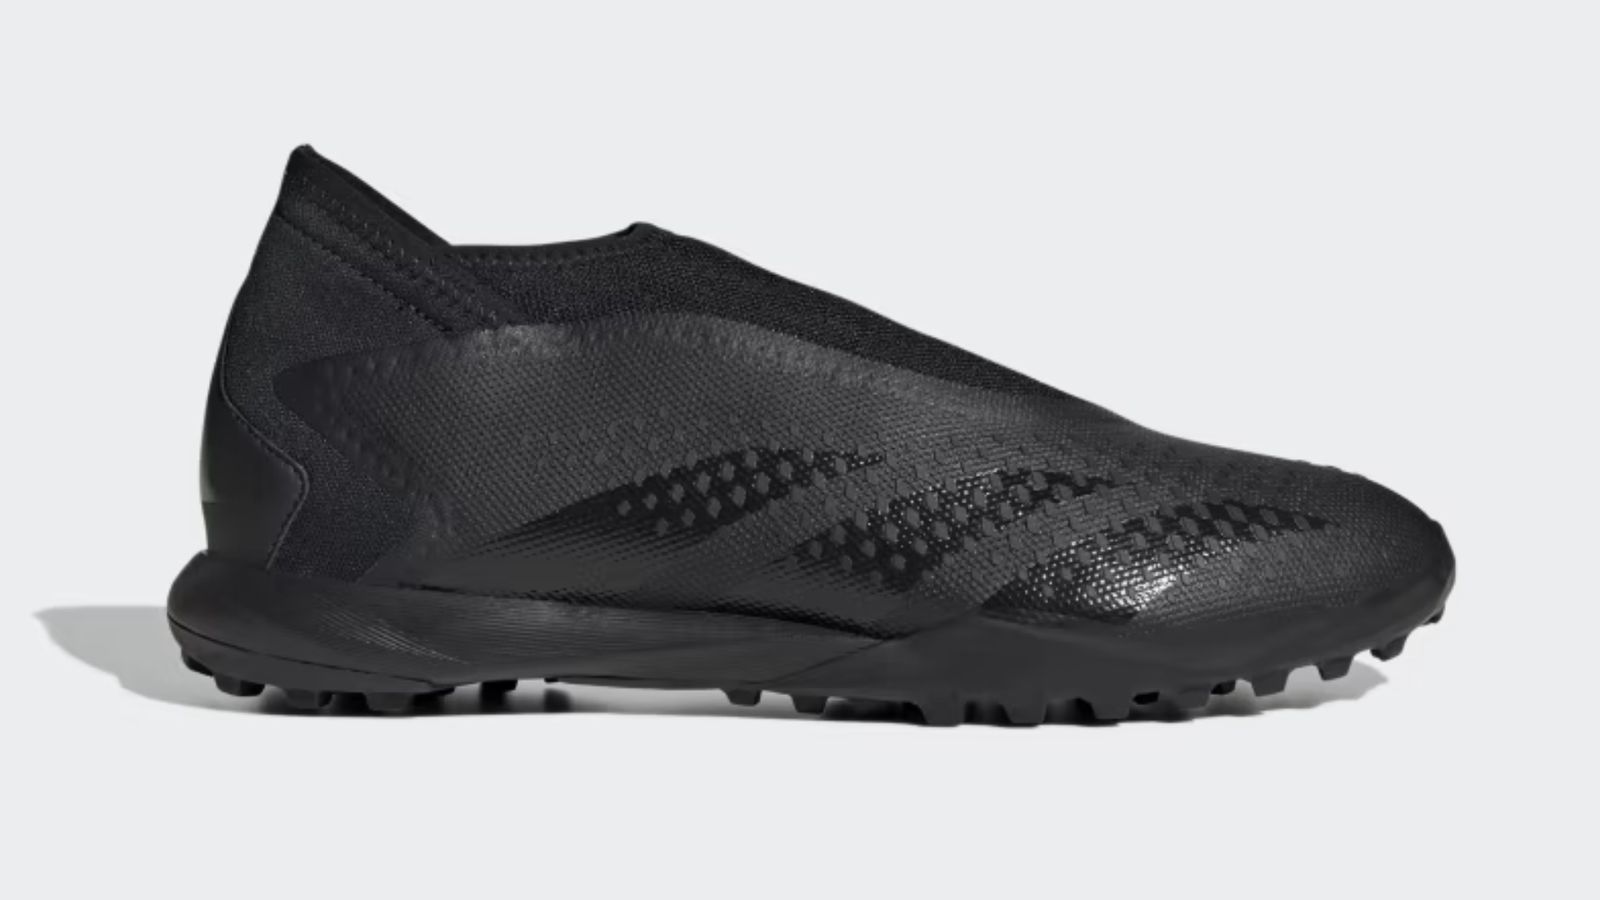 adidas Predator Accuracy.3 Turf product image of an all-black astro turf boot with a knitted collar.